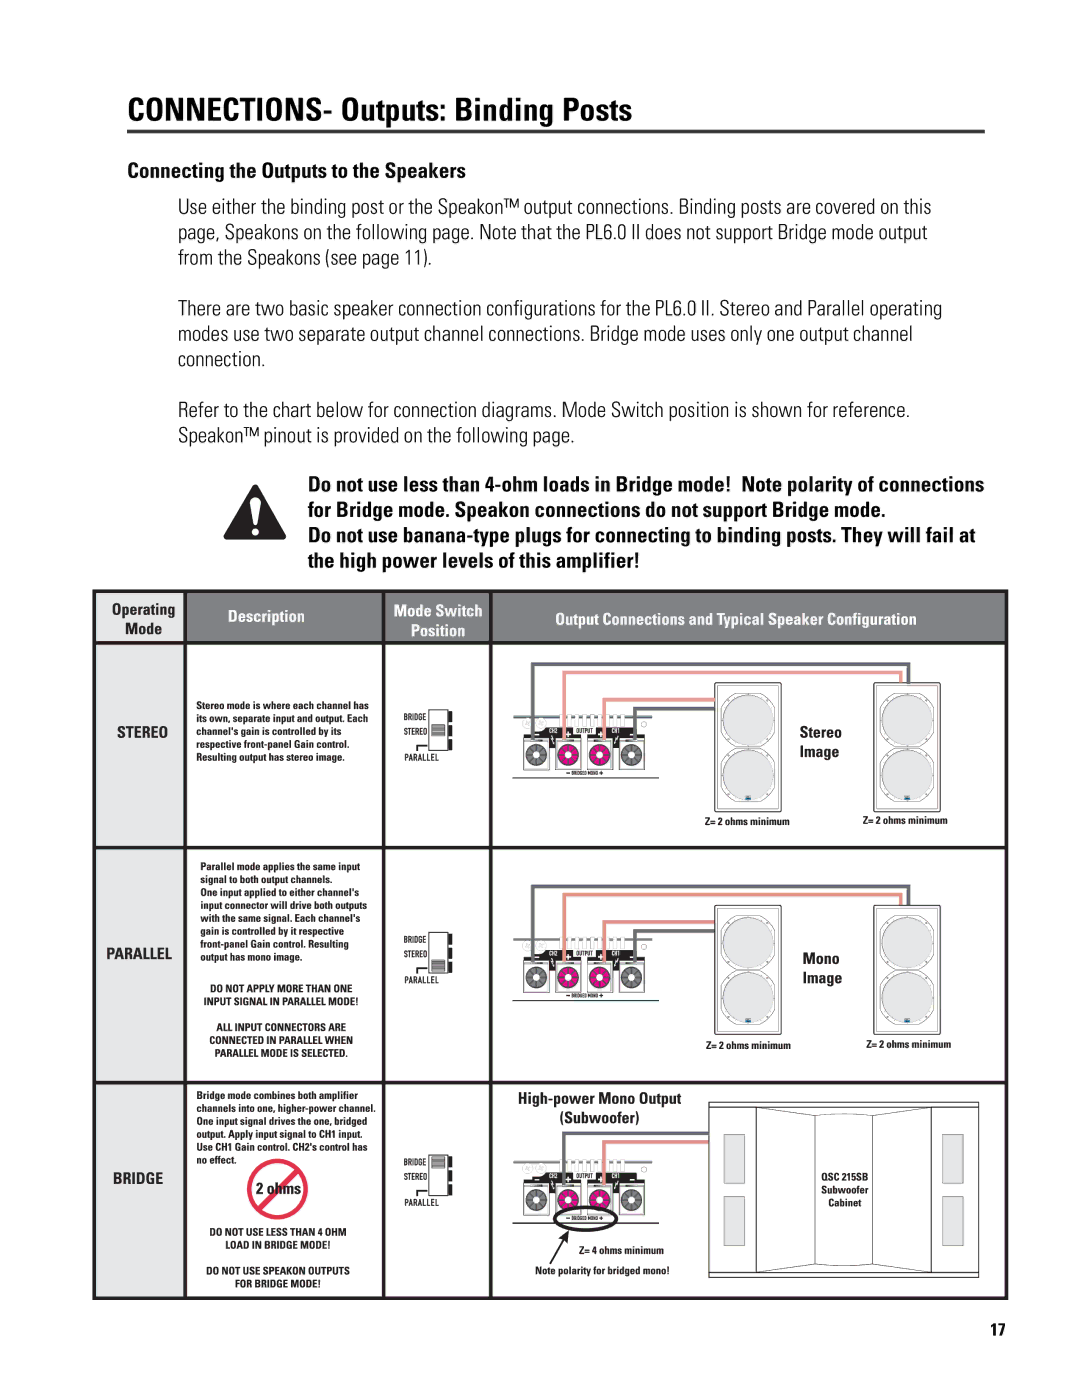 QSC Audio 6.0 II user manual CONNECTIONS- Outputs: Binding Posts, Connecting the Outputs to the Speakers 